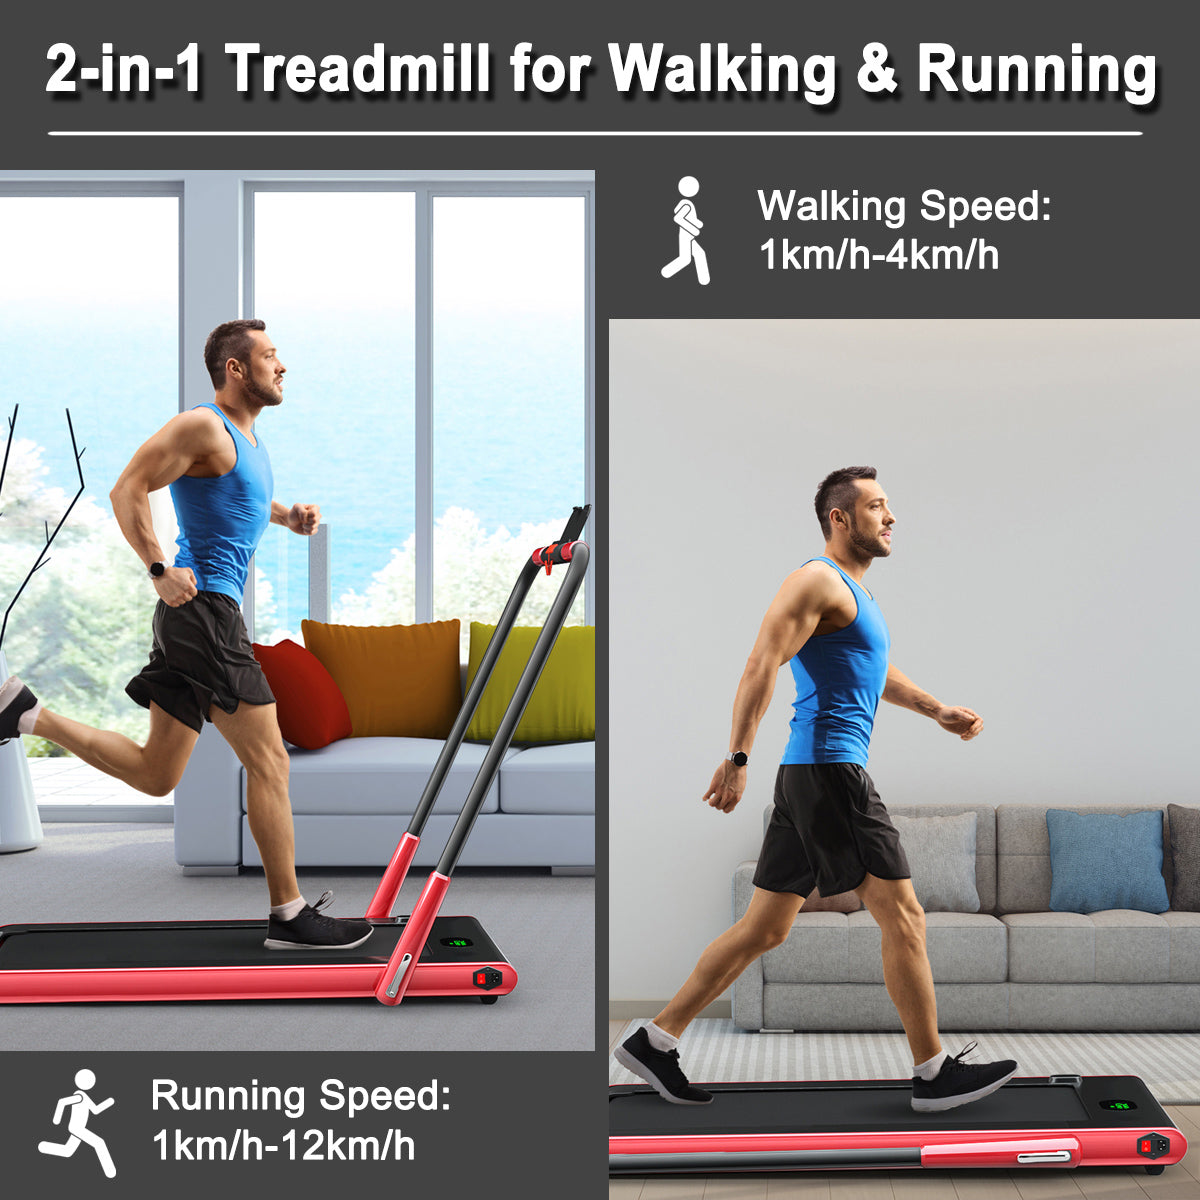 Folding Treadmill with LED Display Bluetooth Speaker-Red